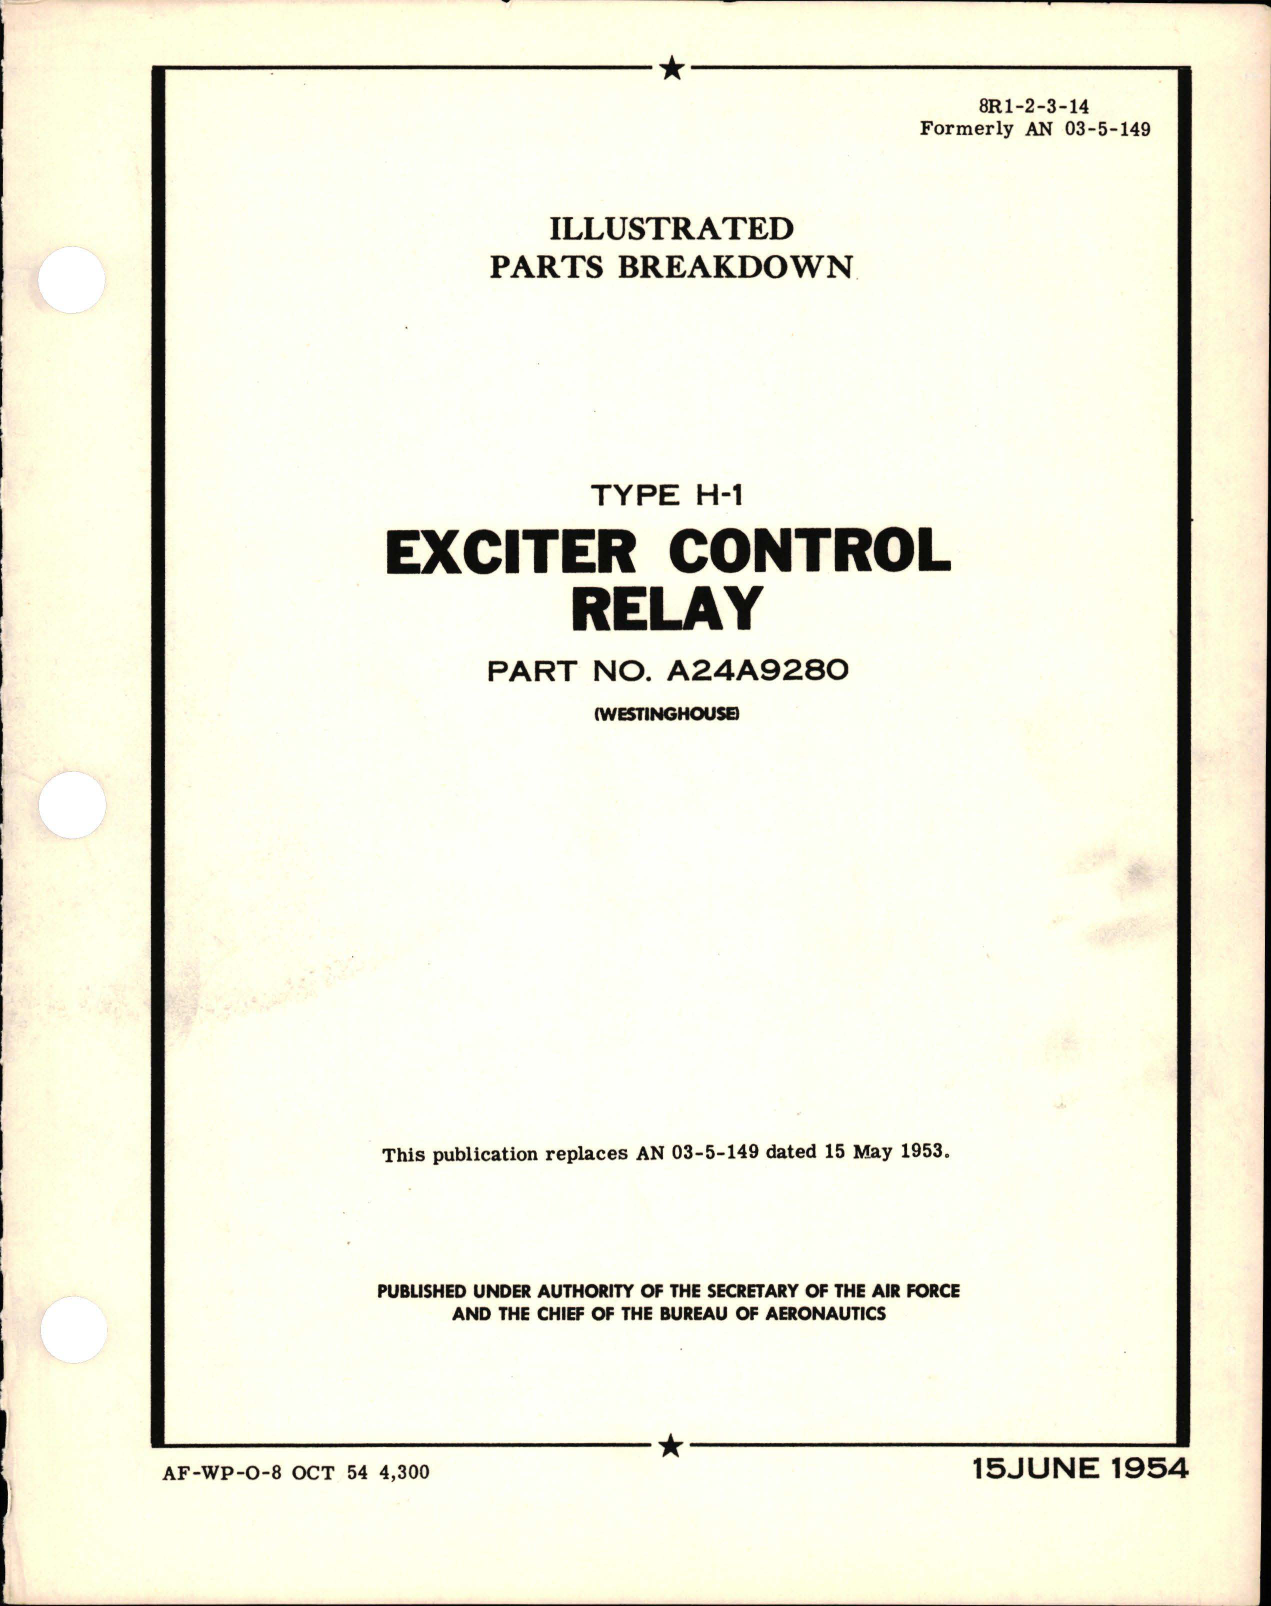 Sample page 1 from AirCorps Library document: Illustrated Parts Breakdown for Exciter Control Relay - Type H-1 - Part A24A9280